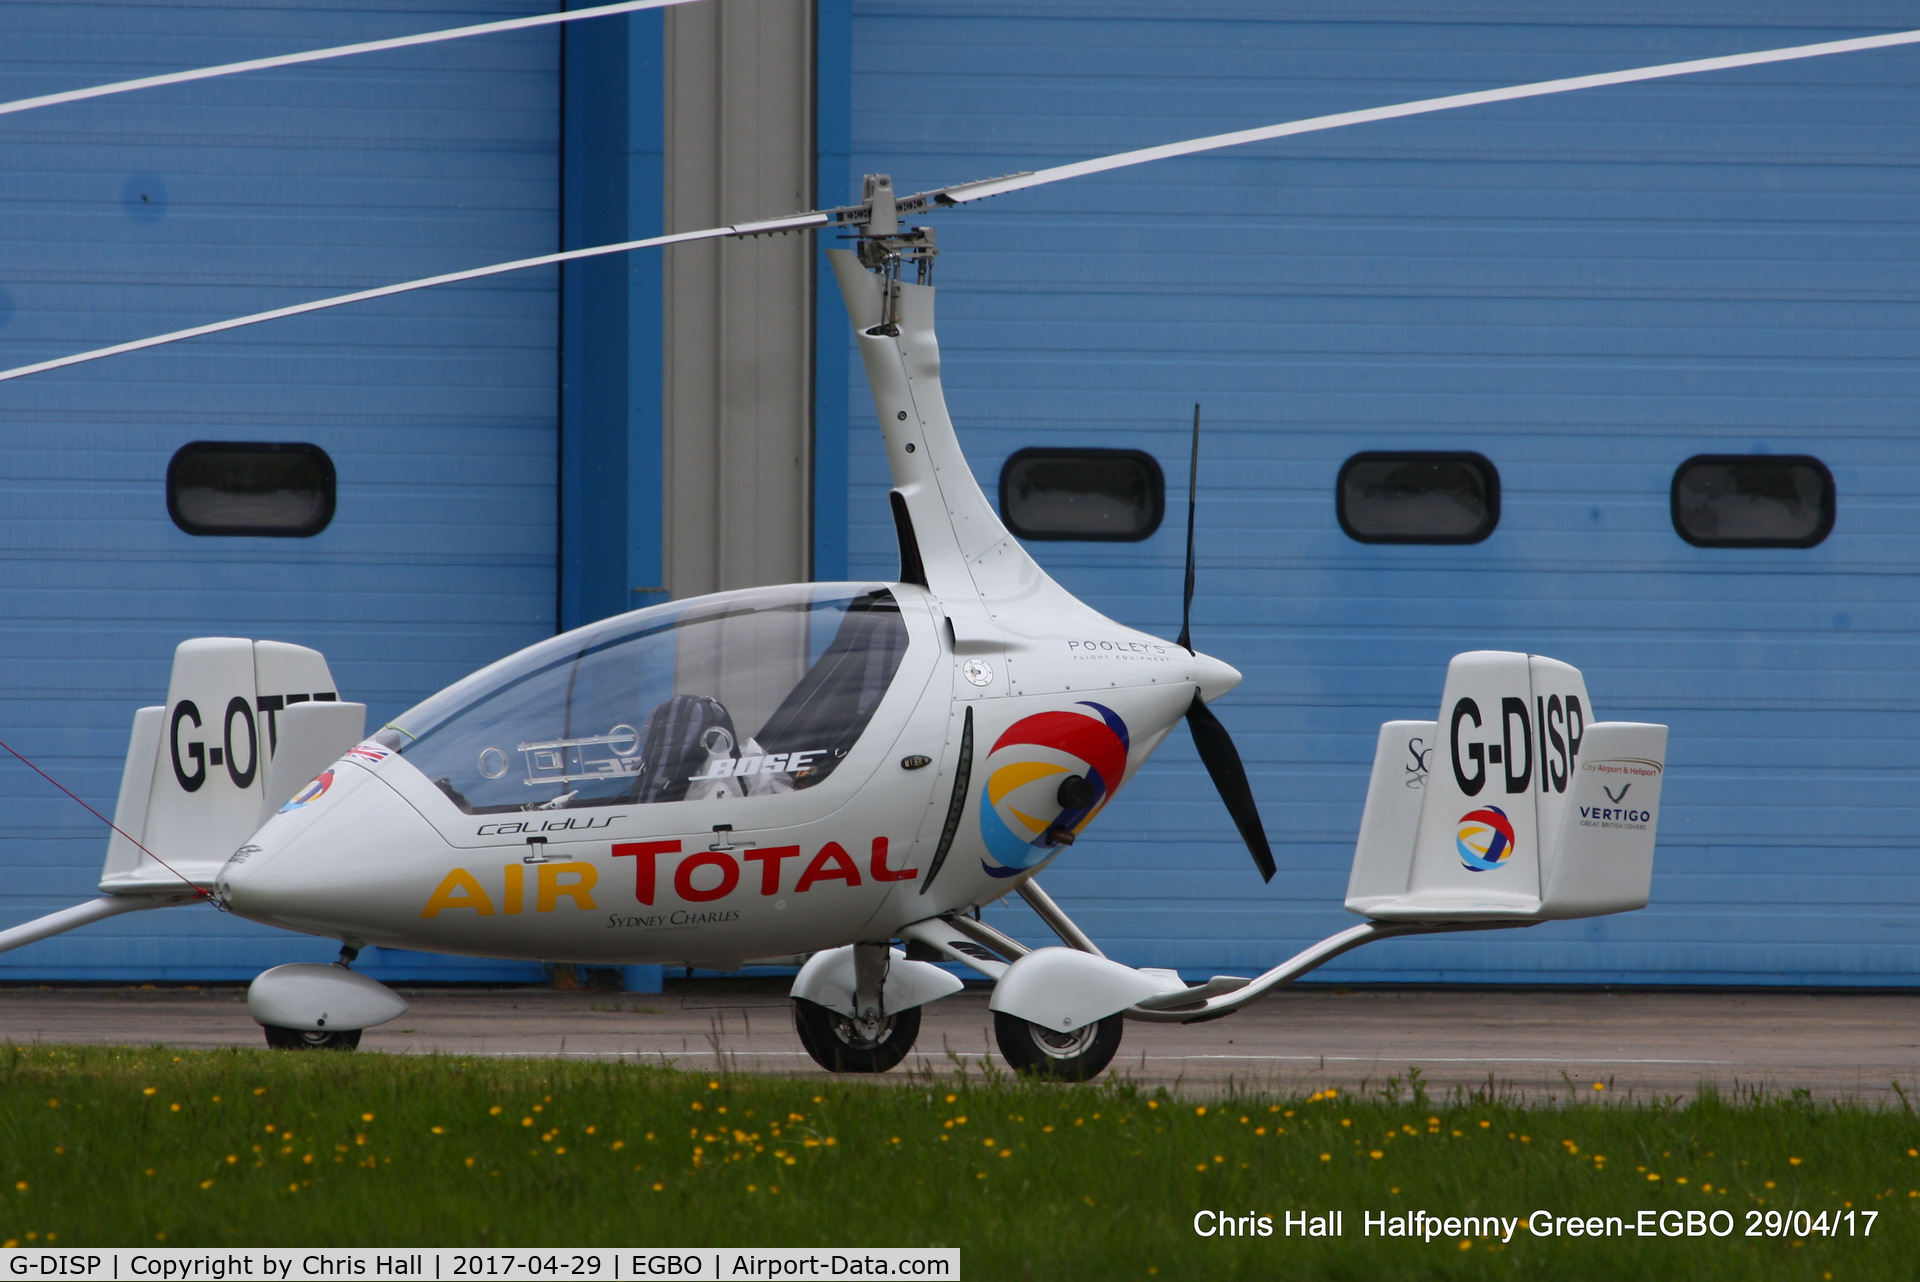 G-DISP, 2016 RotorSport UK Calidus C/N RSUK/CALS/030, at the Radial & Trainer fly-in